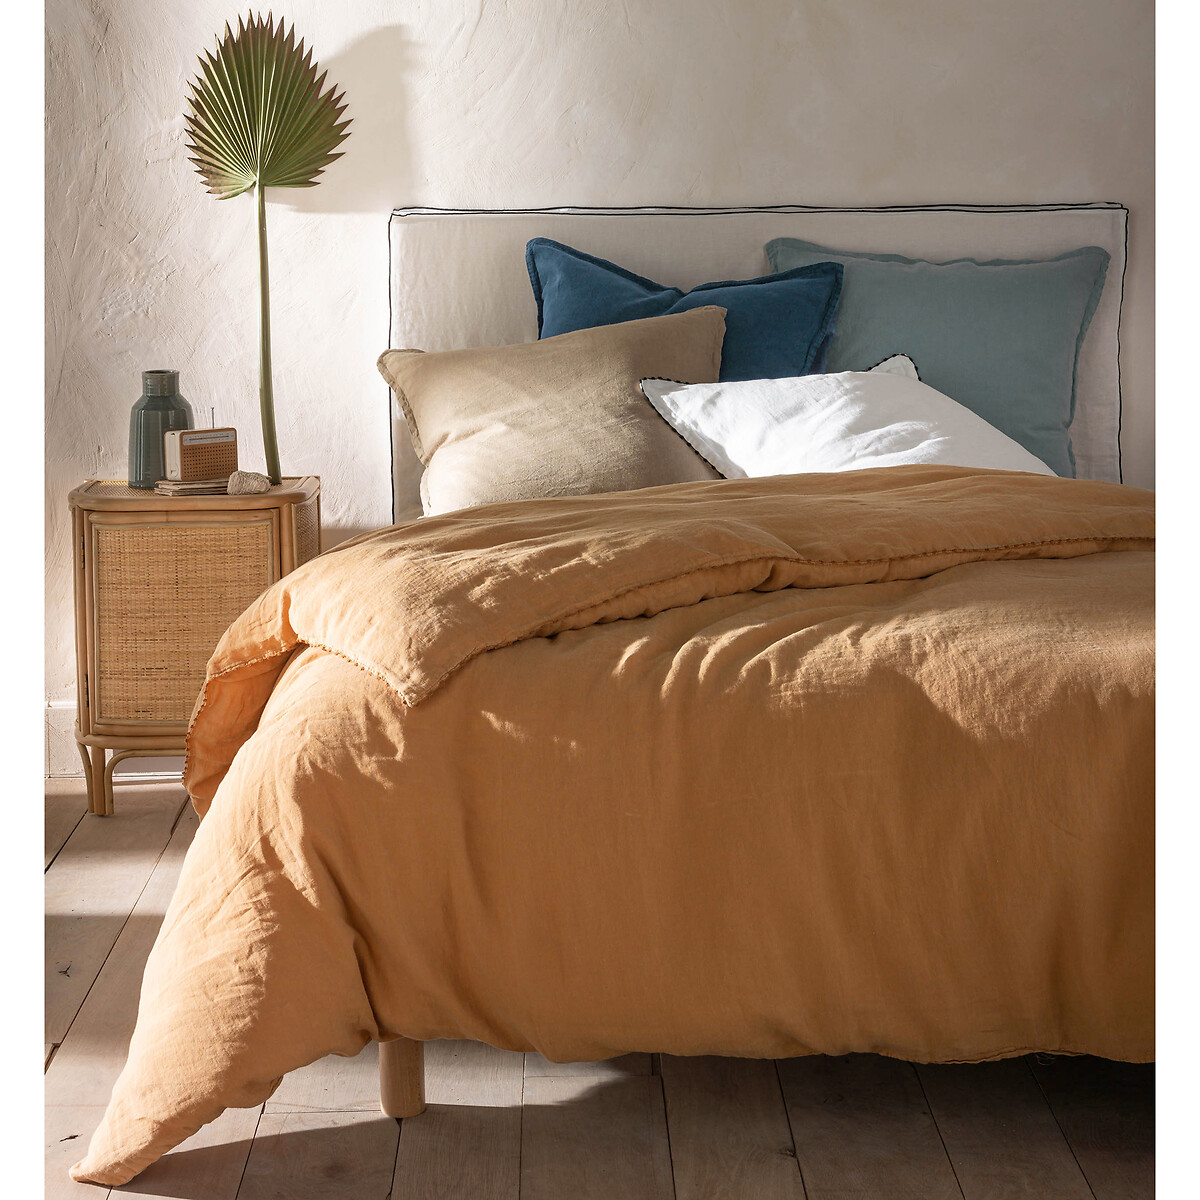 Washed Linen Duvet Cover La Redoute, What Size Duvet For 90 X 200 Bed